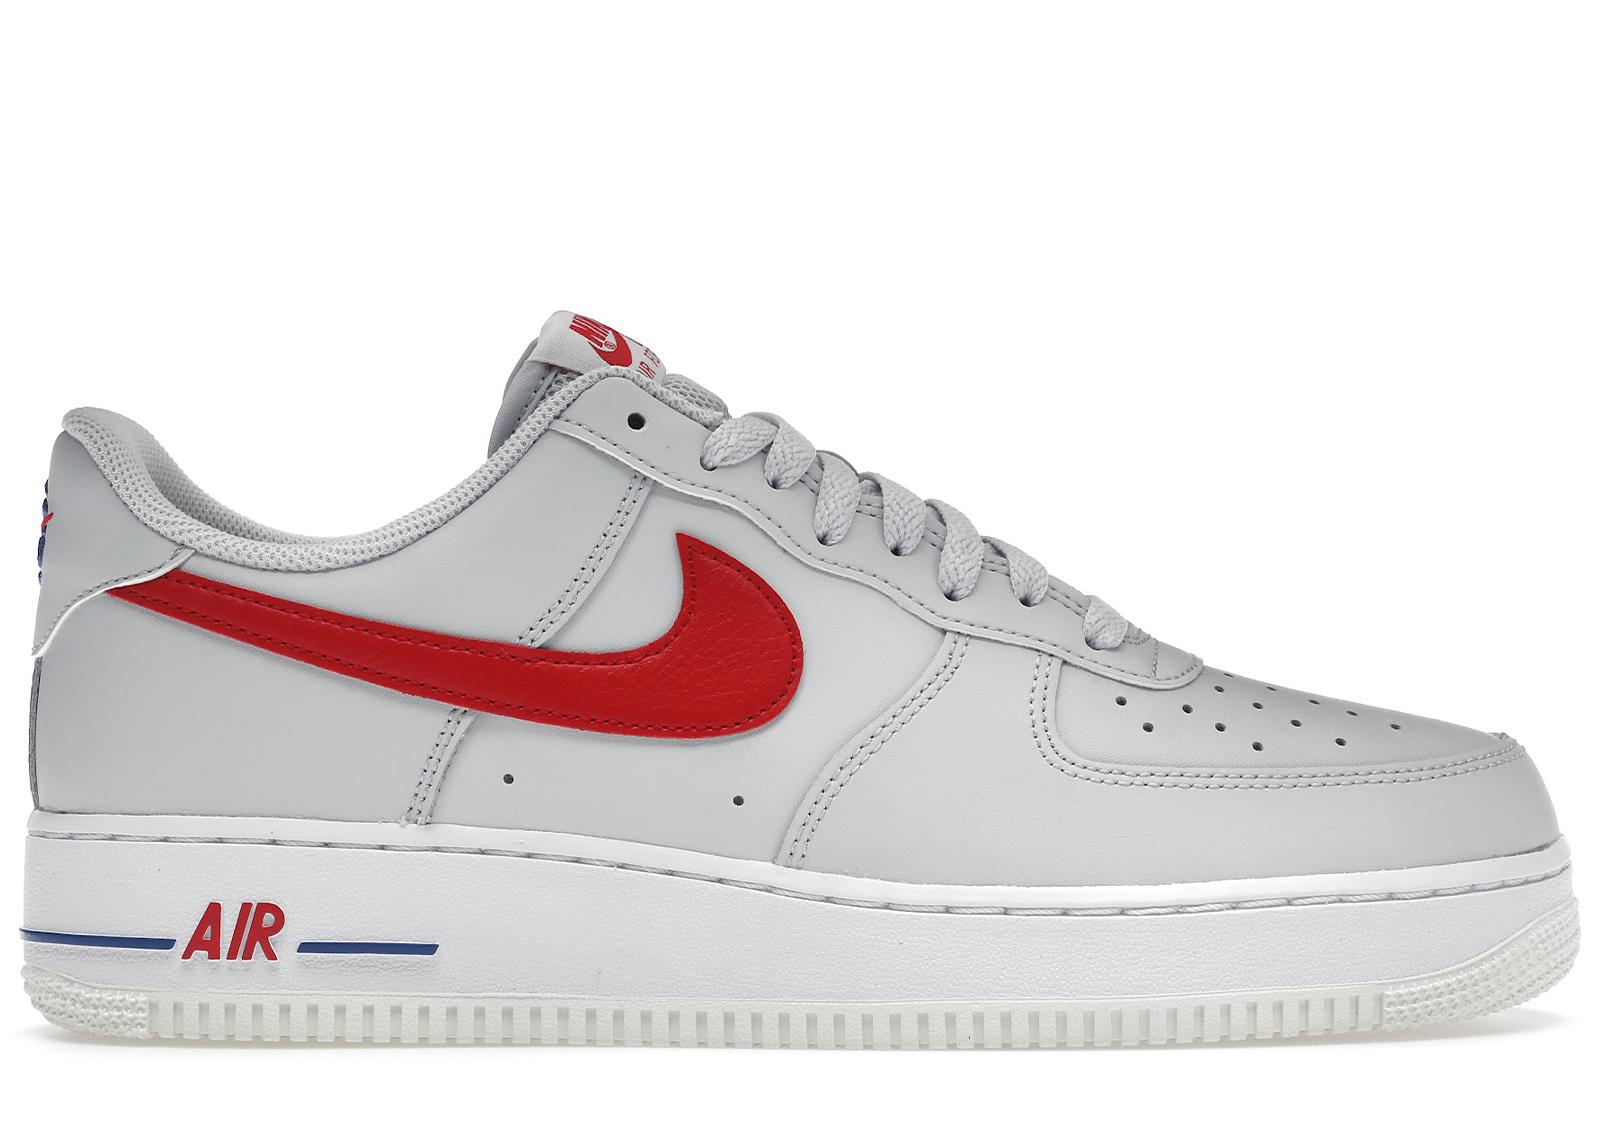 Nike Air Force 1 Low '07 Team USA Men's - DX2660-001 - US